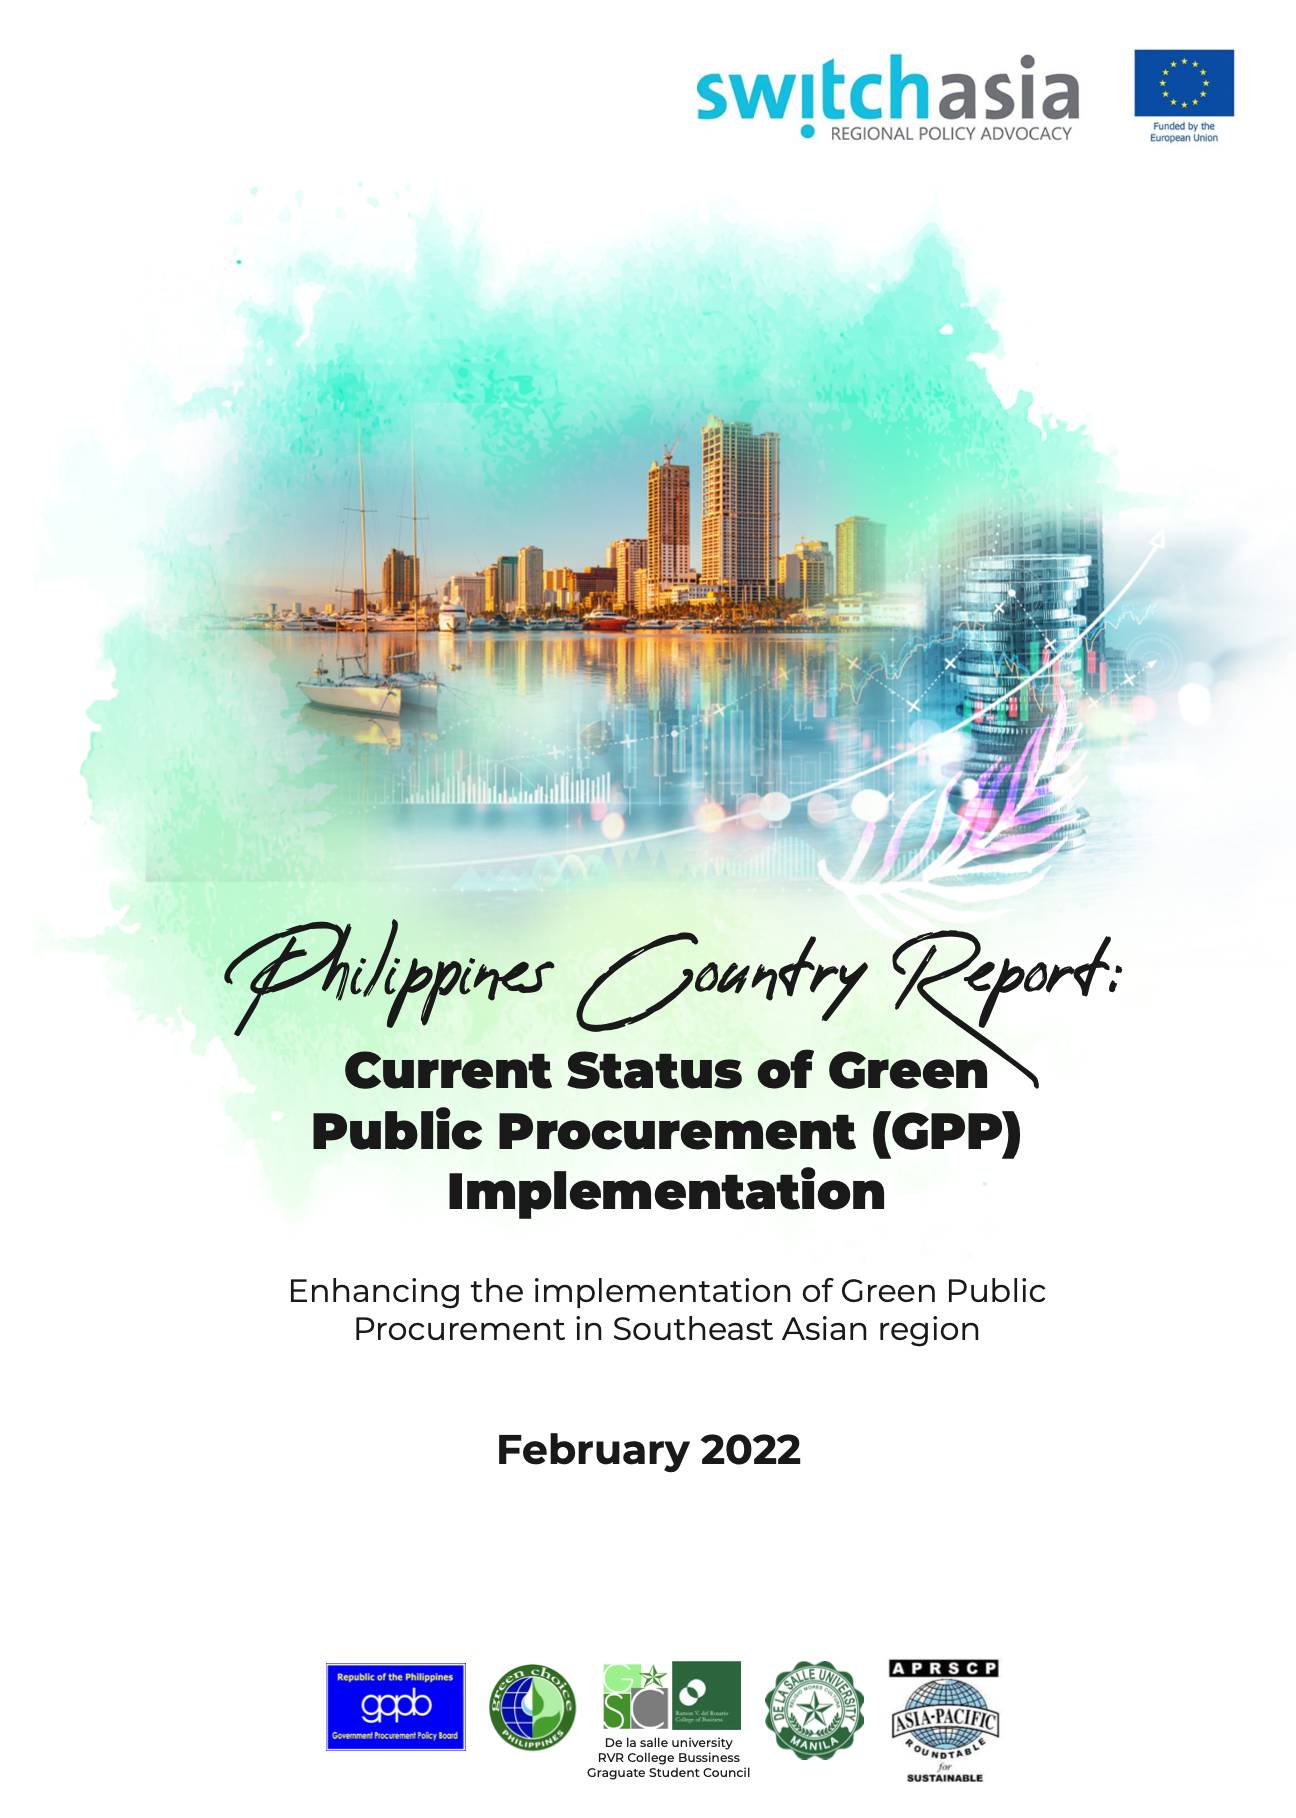 Philippines Country Report: Current Status of Green Public Procurement Implementation3402